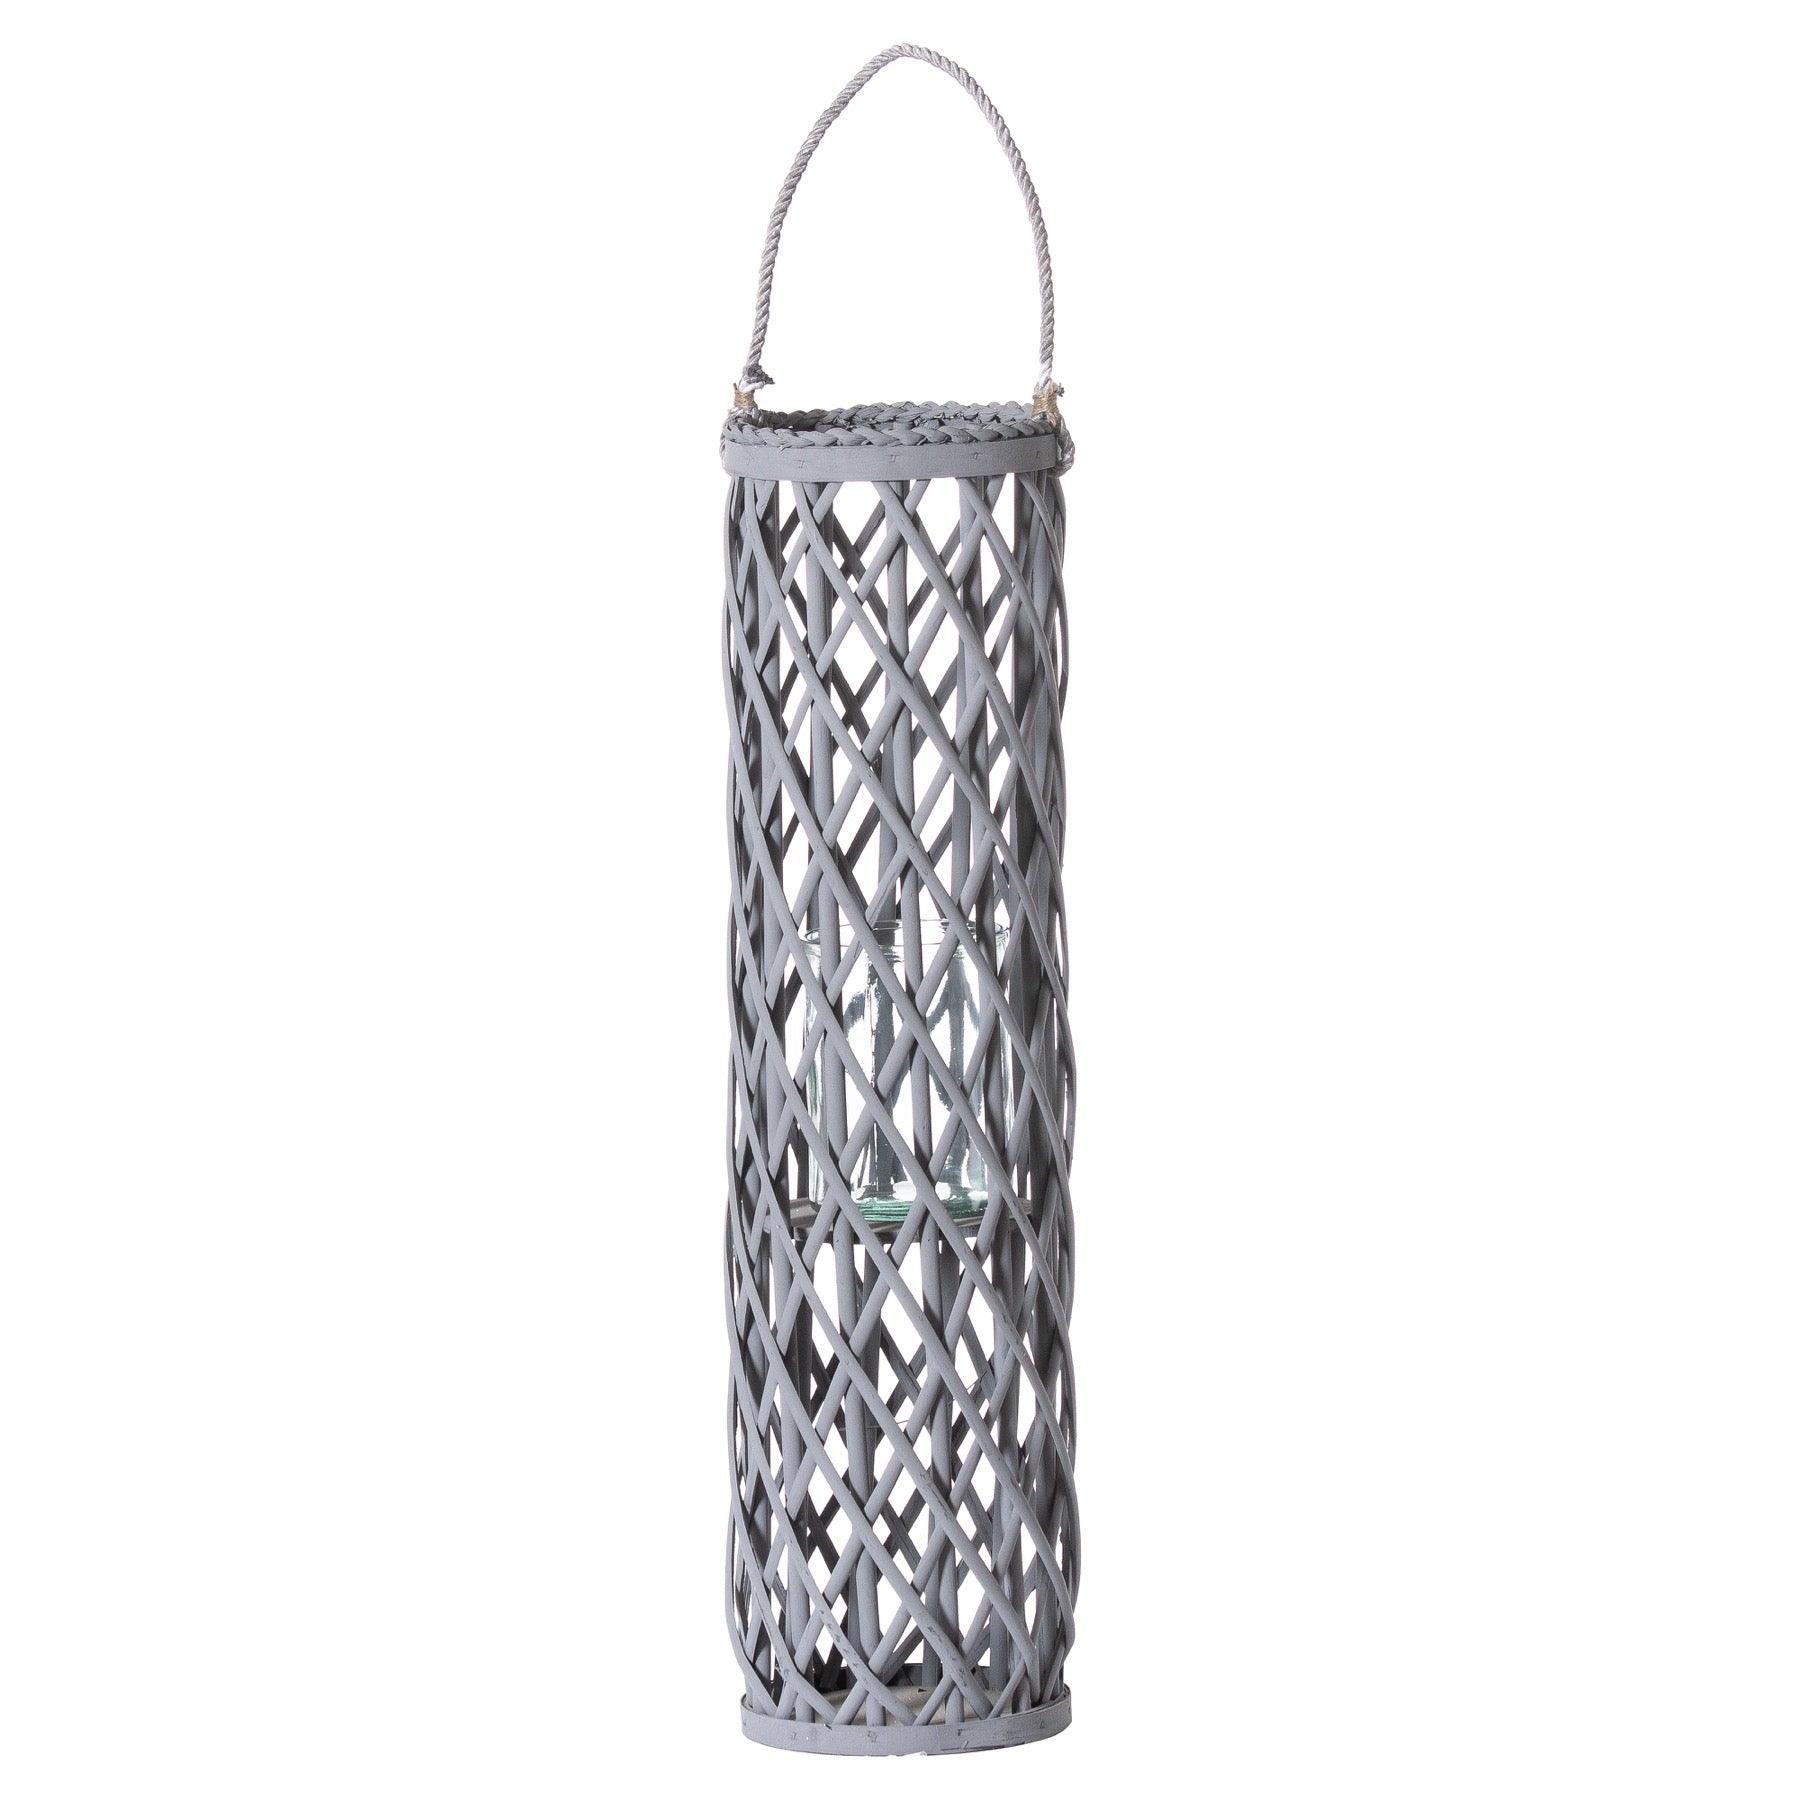 View Large Grey Wicker Lantern With Glass Hurricane information